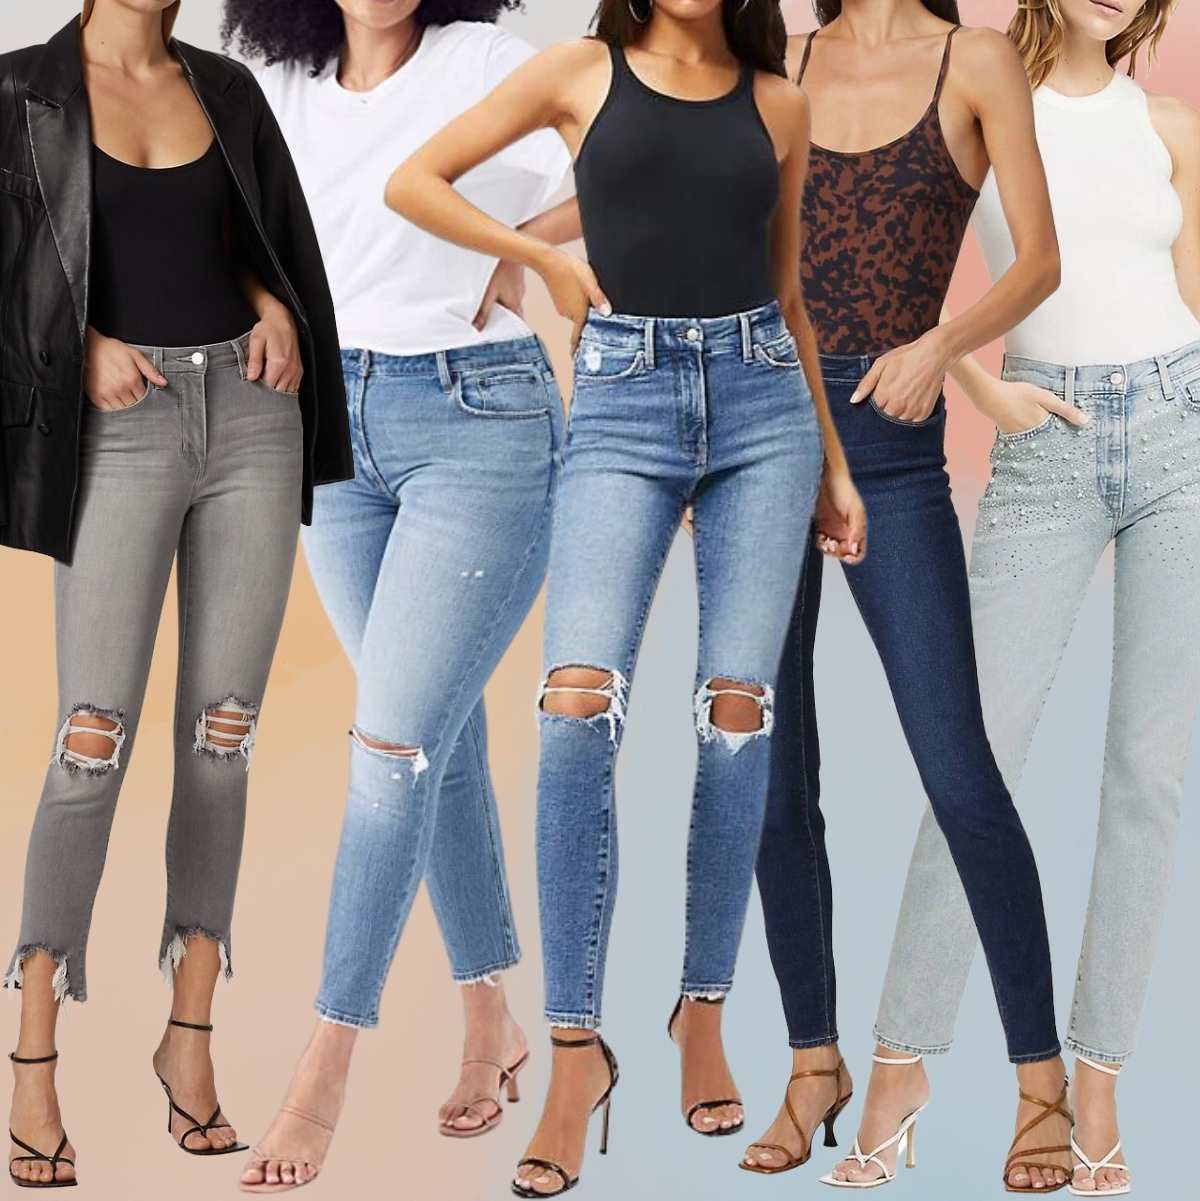 Curious What Shoes to Wear with Jeans Outfits? Here are